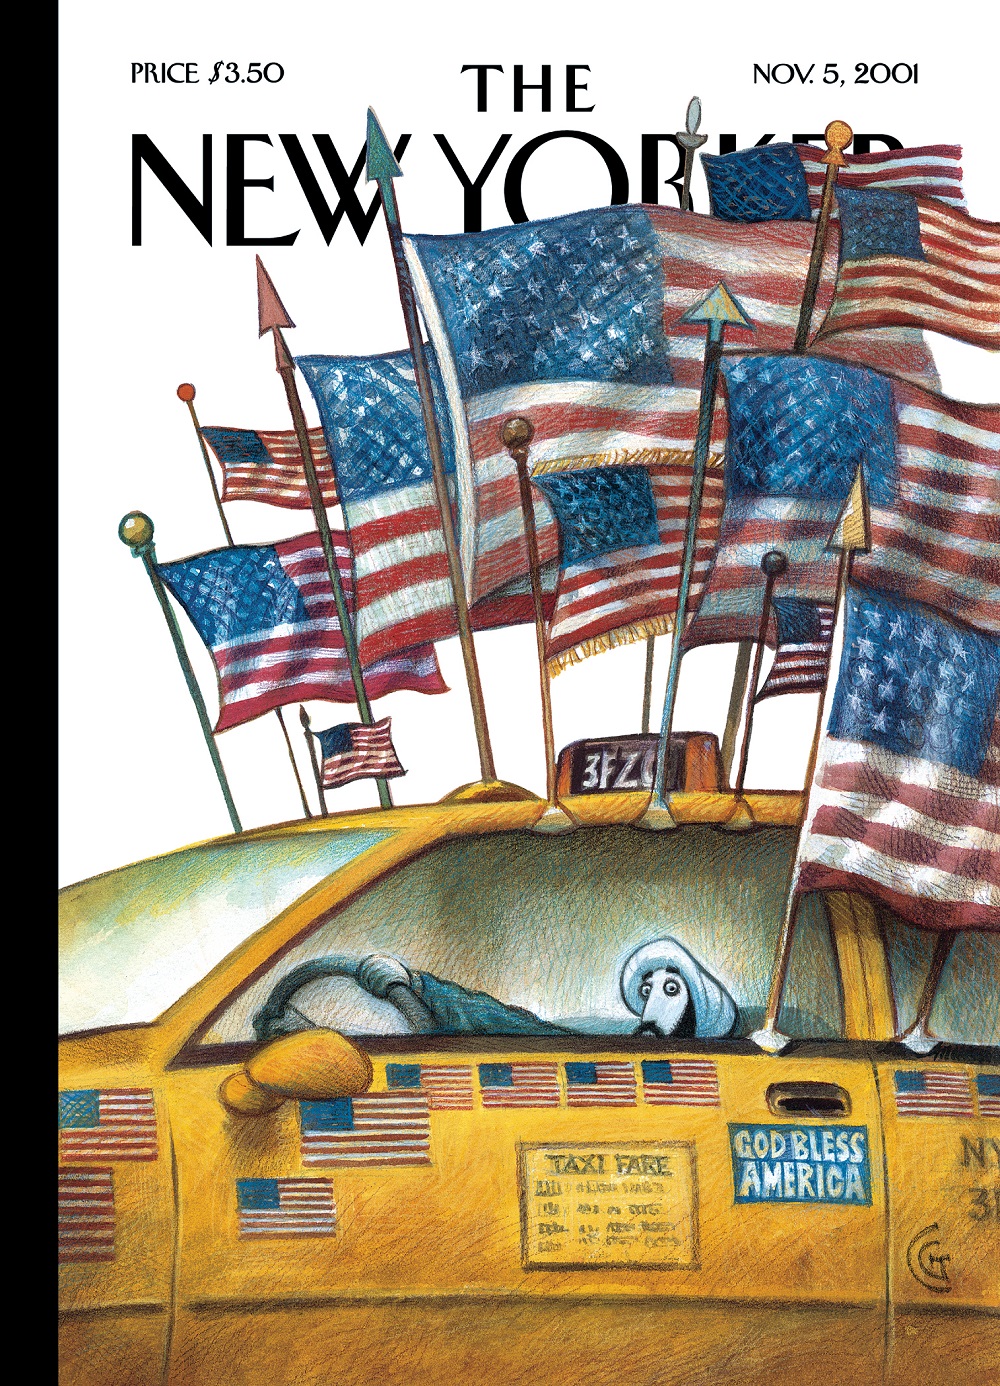 An illustrated cover of the New Yorker magazine depicts a yellow cab driver with a head covering peering out his window while gripping the steering wheel. His cab is covered in American flag decals and a God Bless America sticker. Nearly a dozen more American flags attached to the cab are waving in the wind.